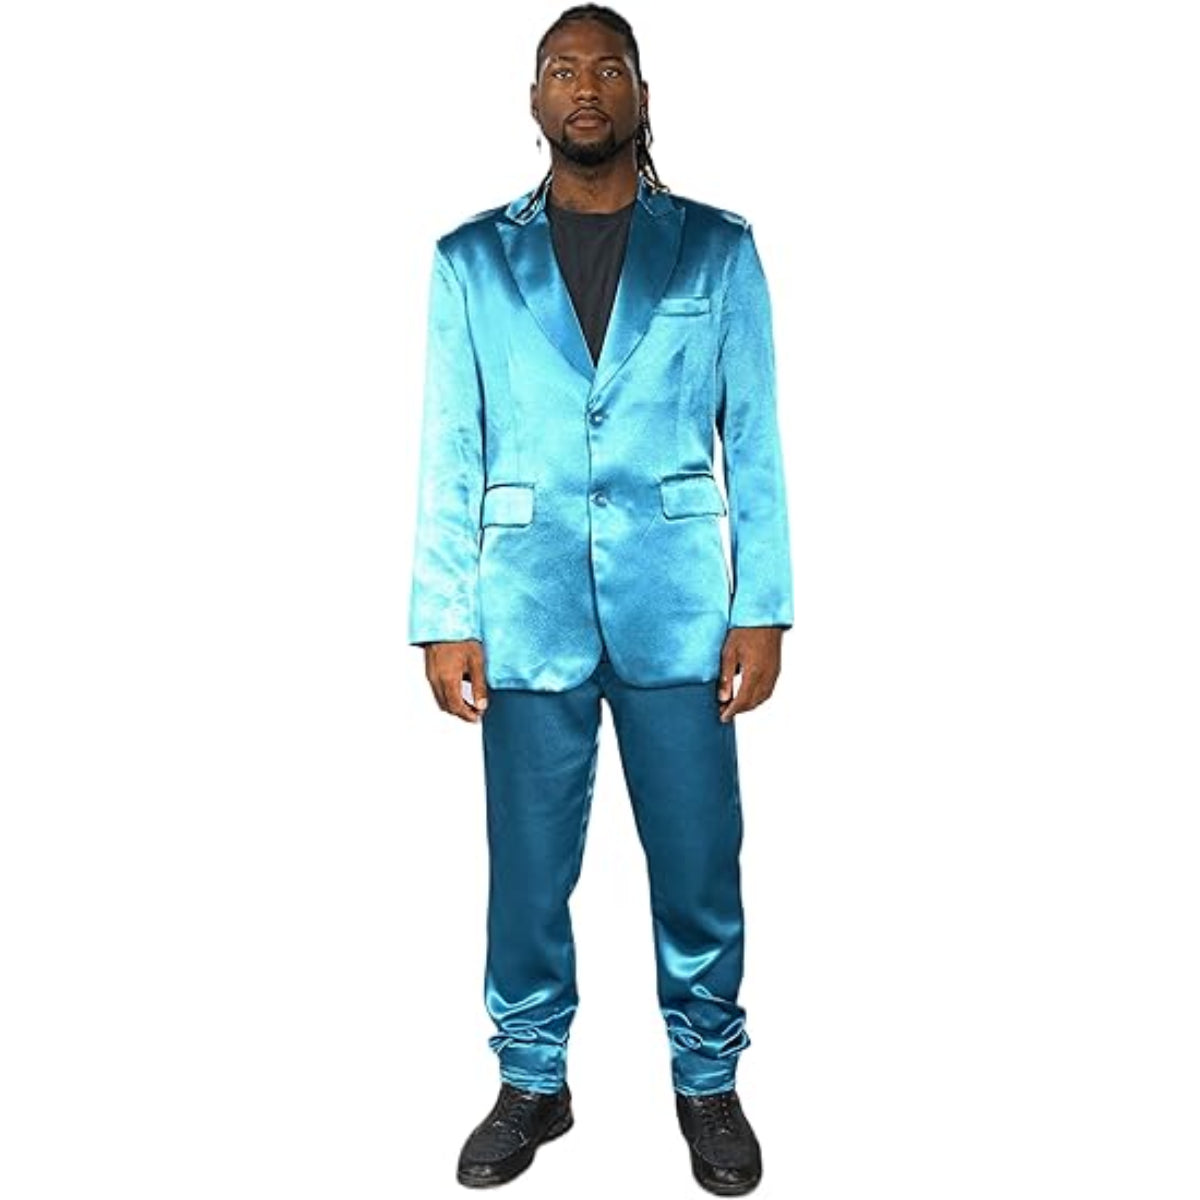 Blue Roxbury Suit: 90's Guys Jacket, Pants, and Belt Set for Halloween Costume Cosplay Front View